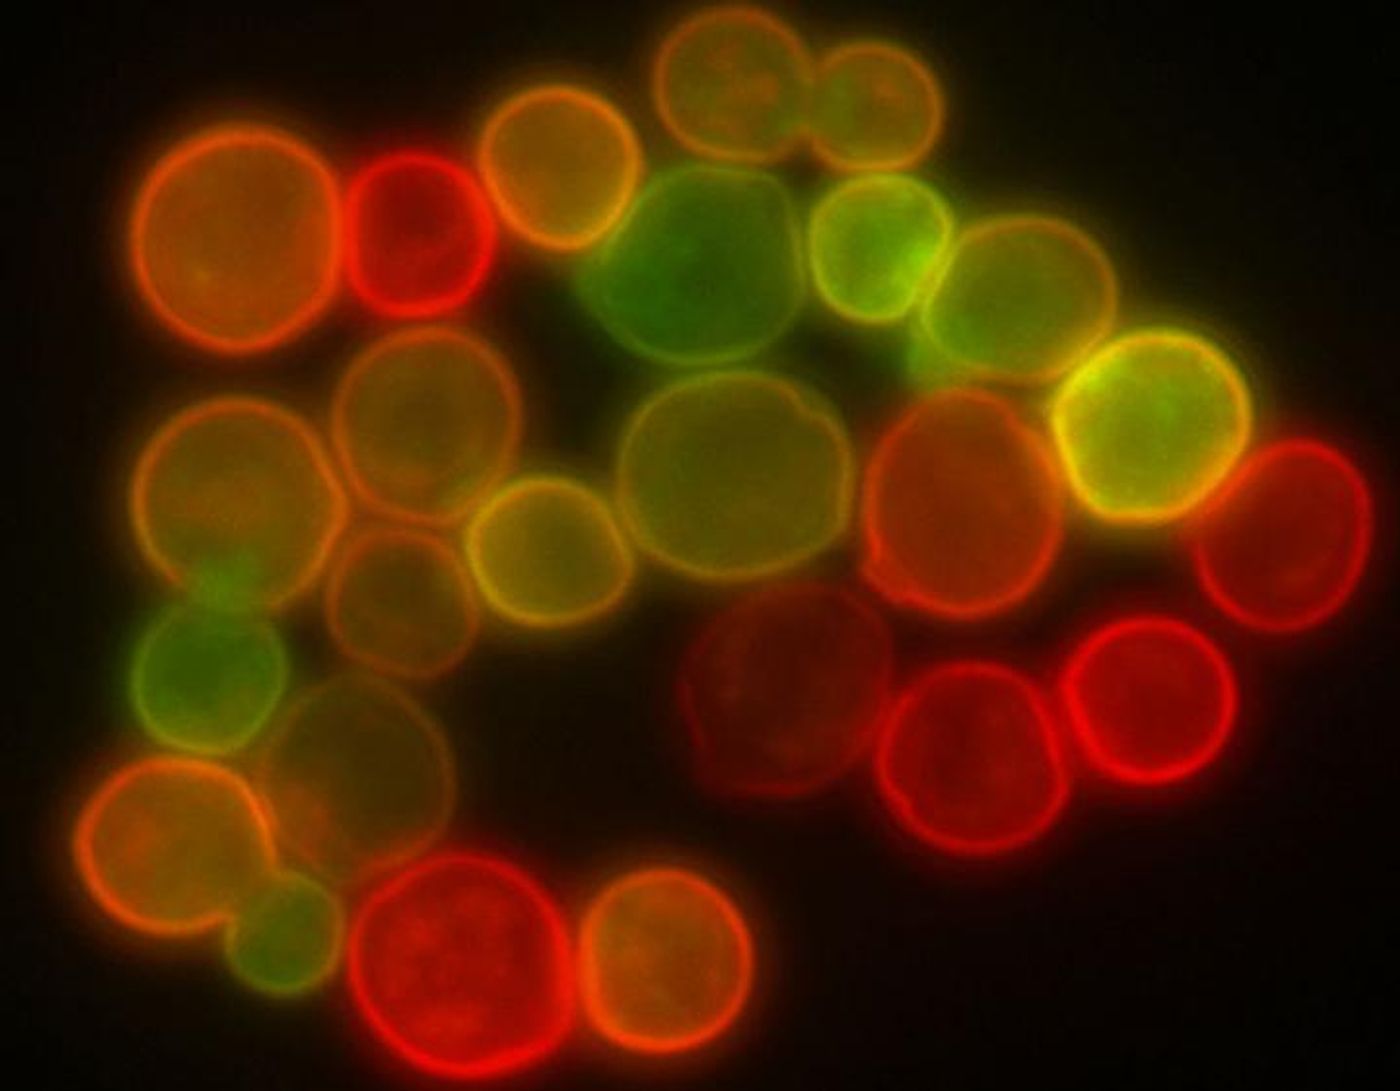 Yeast cells labeled with colorful fluorescent markers are shown. / Credit: Wikimedia Commons 